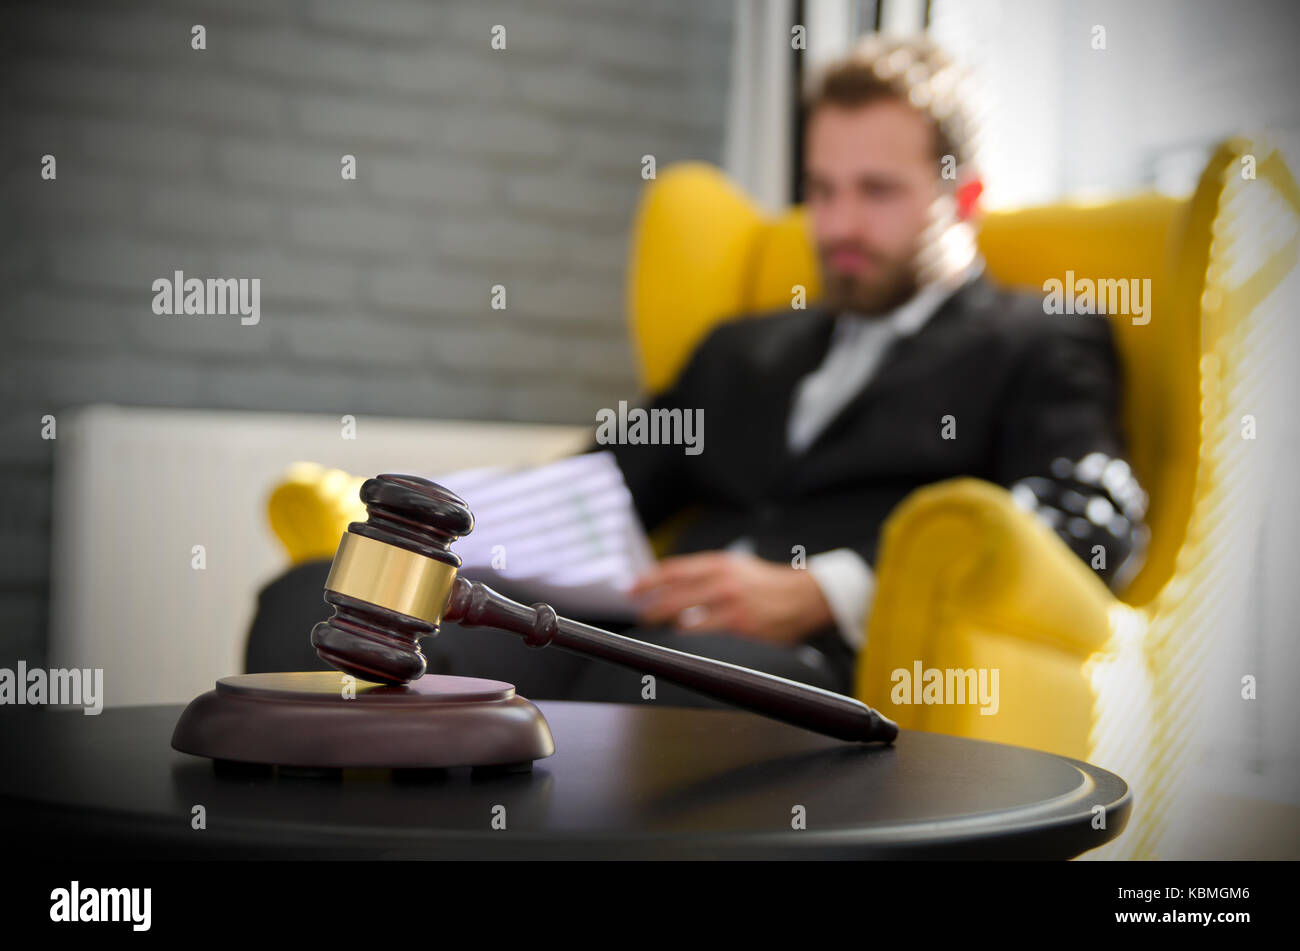 Wooden gavel, working lawyer in background. attorney business judgment justice suite analyzing authority background concept Stock Photo